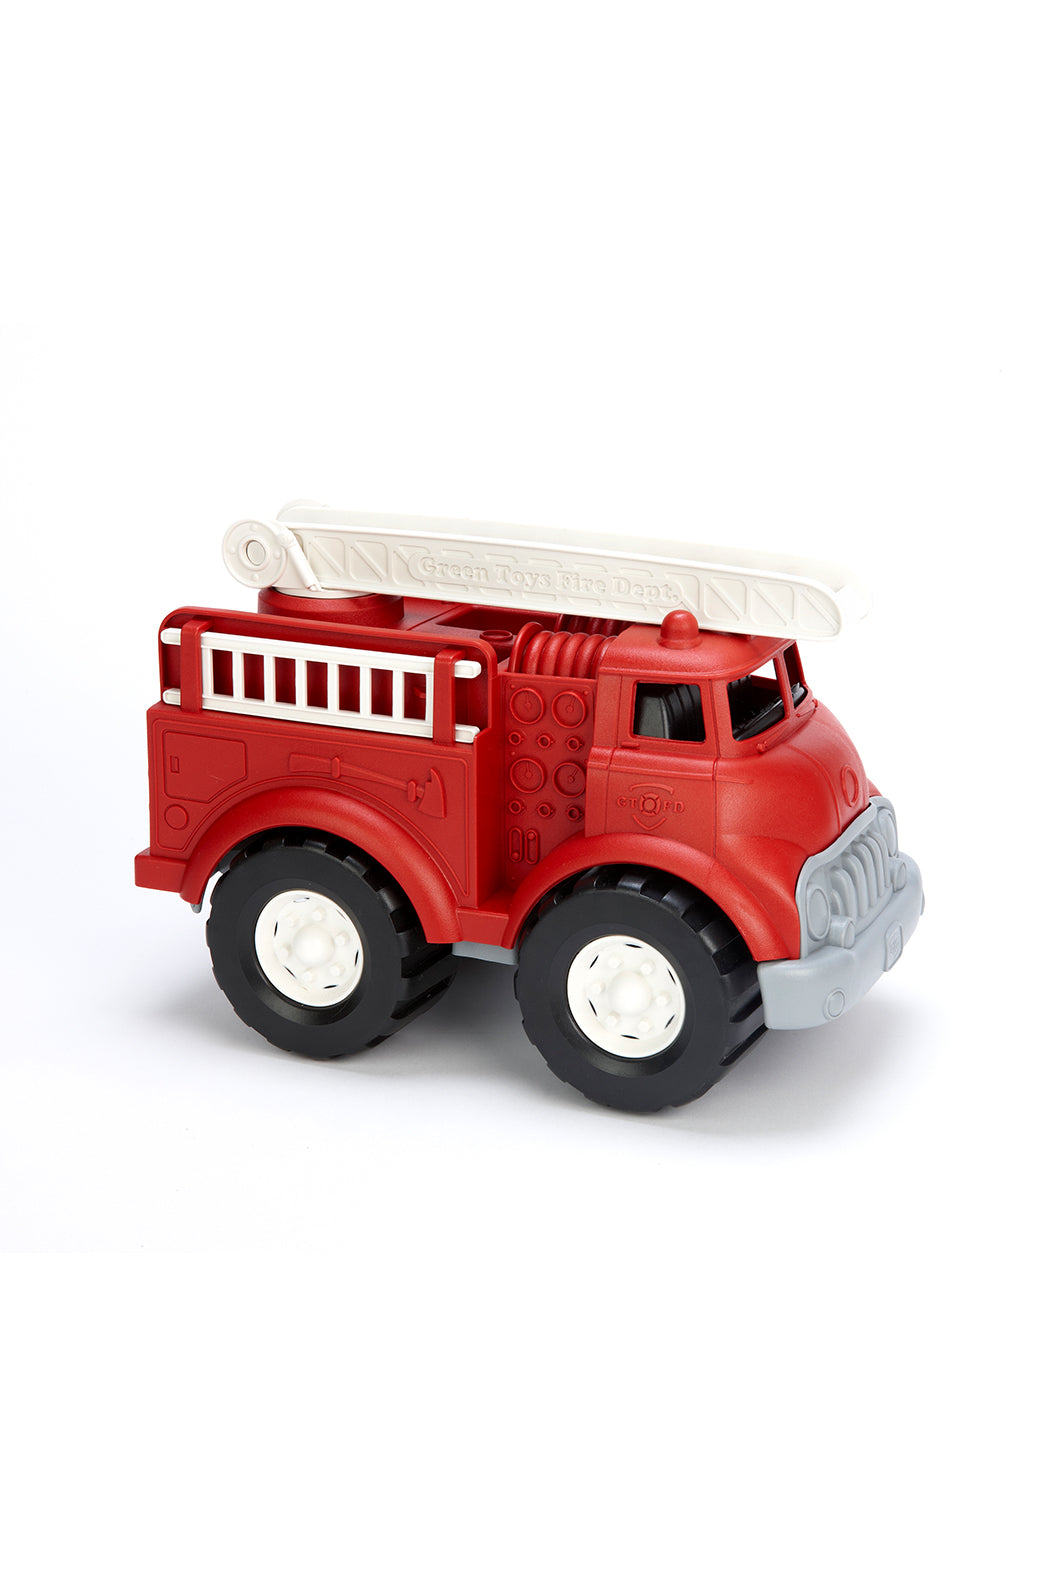 Green Toys Fire Truck Red